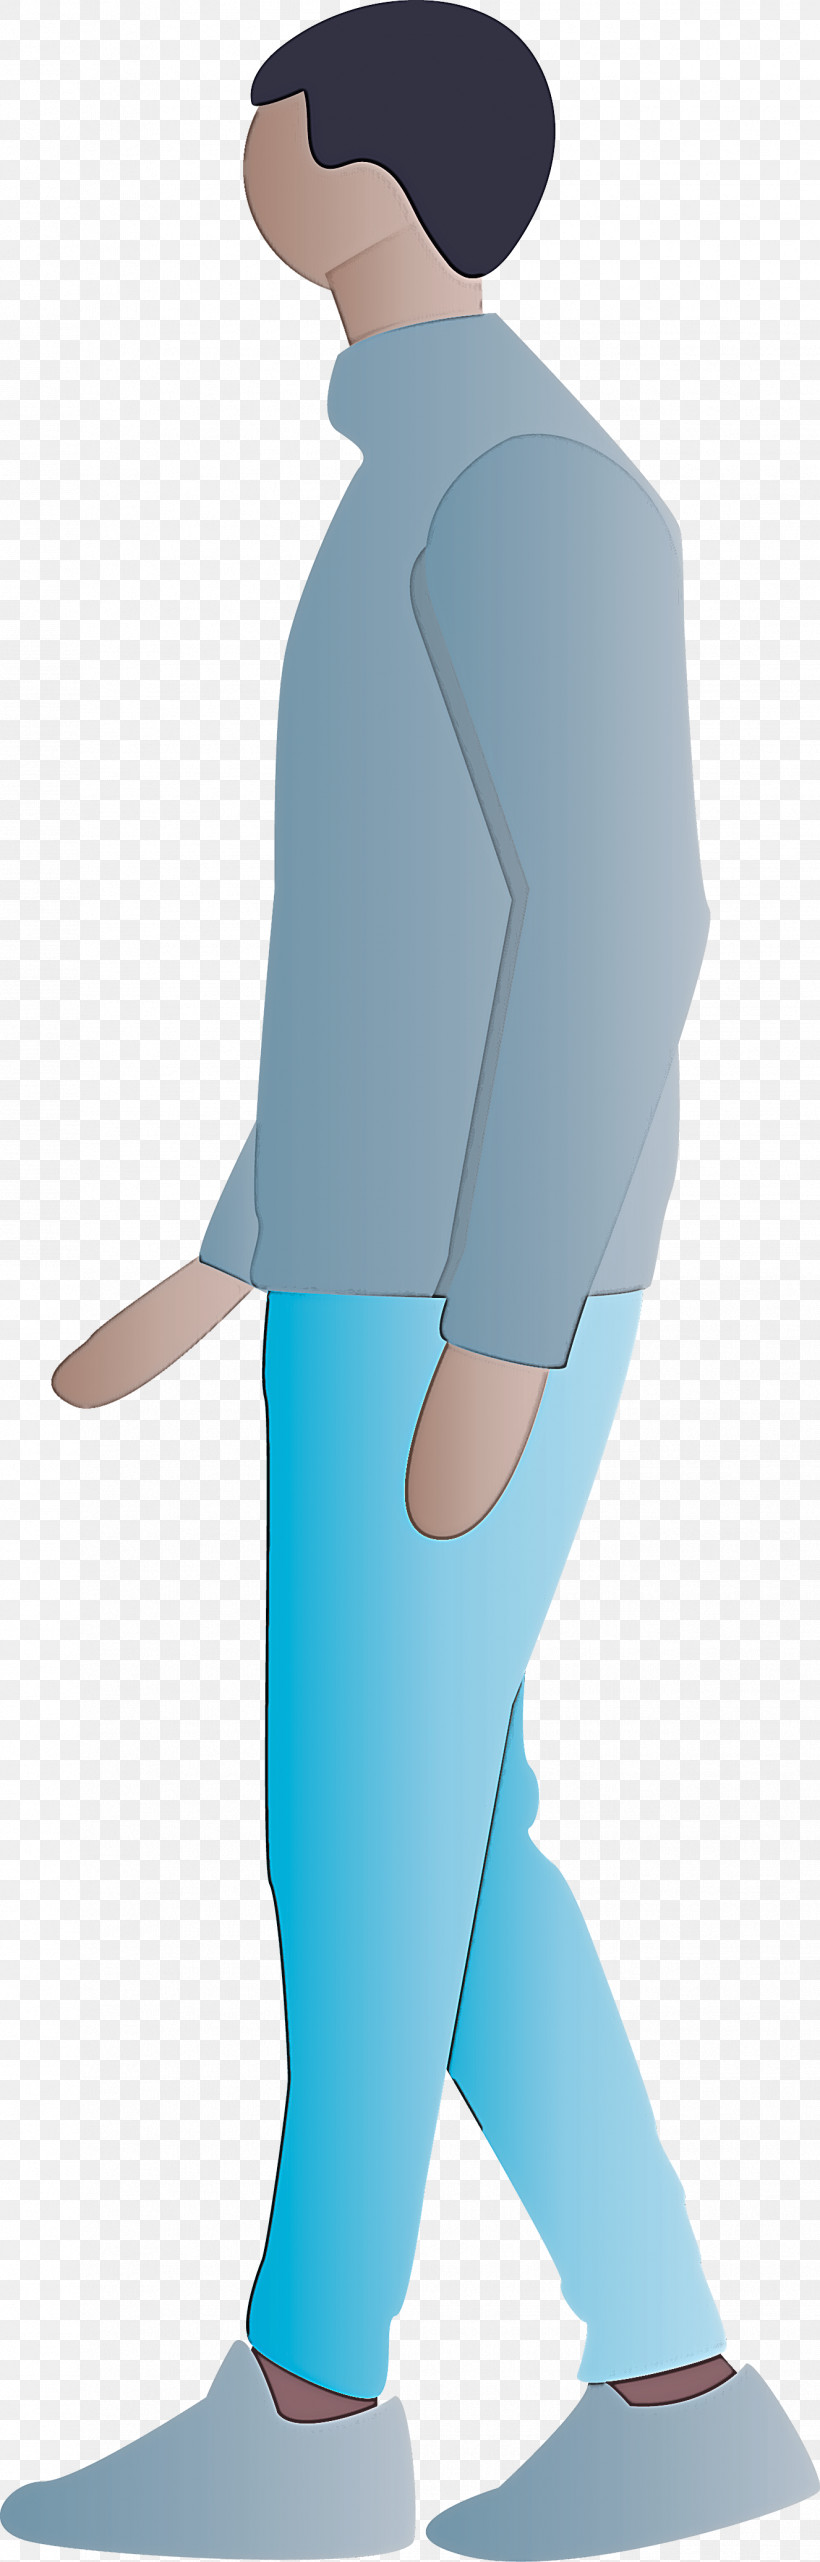 Turquoise Standing Footwear Teal Joint, PNG, 1326x4143px, Cartoon Man, Costume, Footwear, Human Leg, Joint Download Free